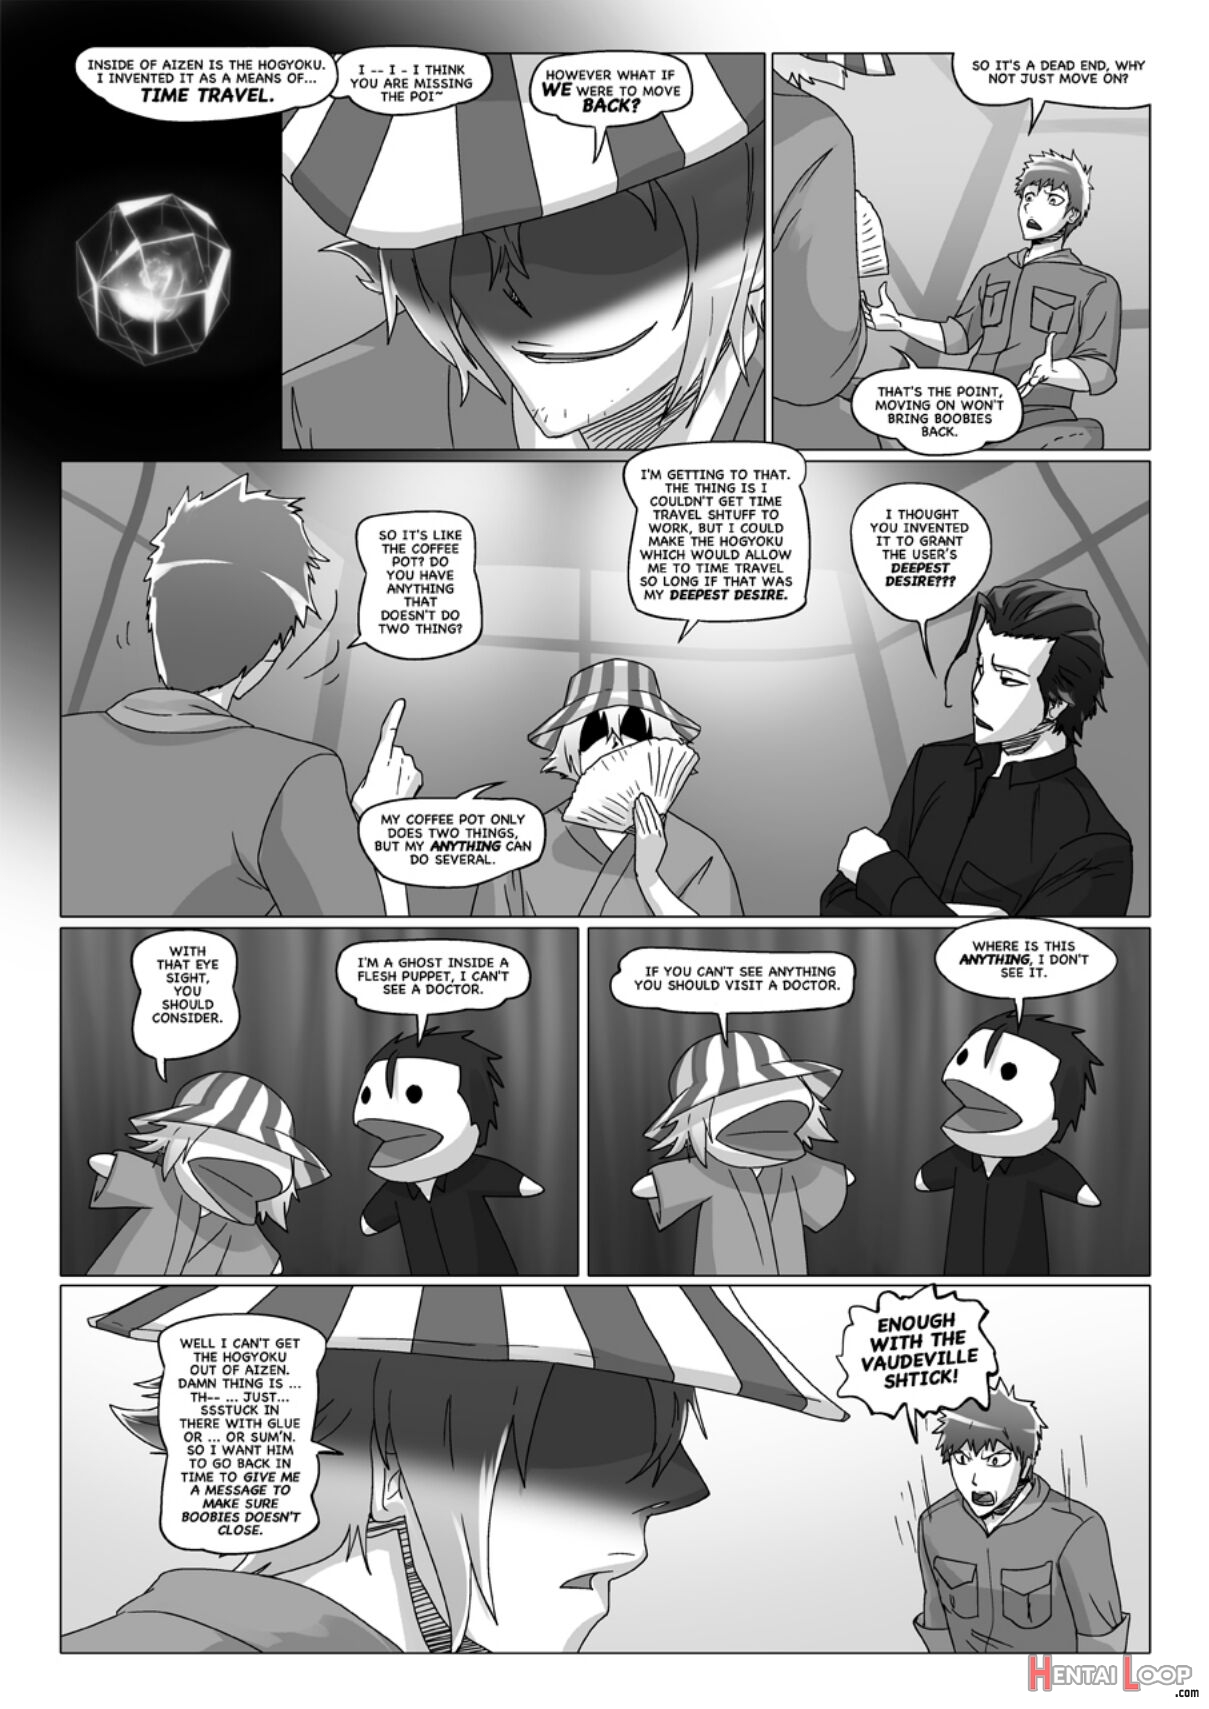 Happy To Serve You - Xxx Version page 303